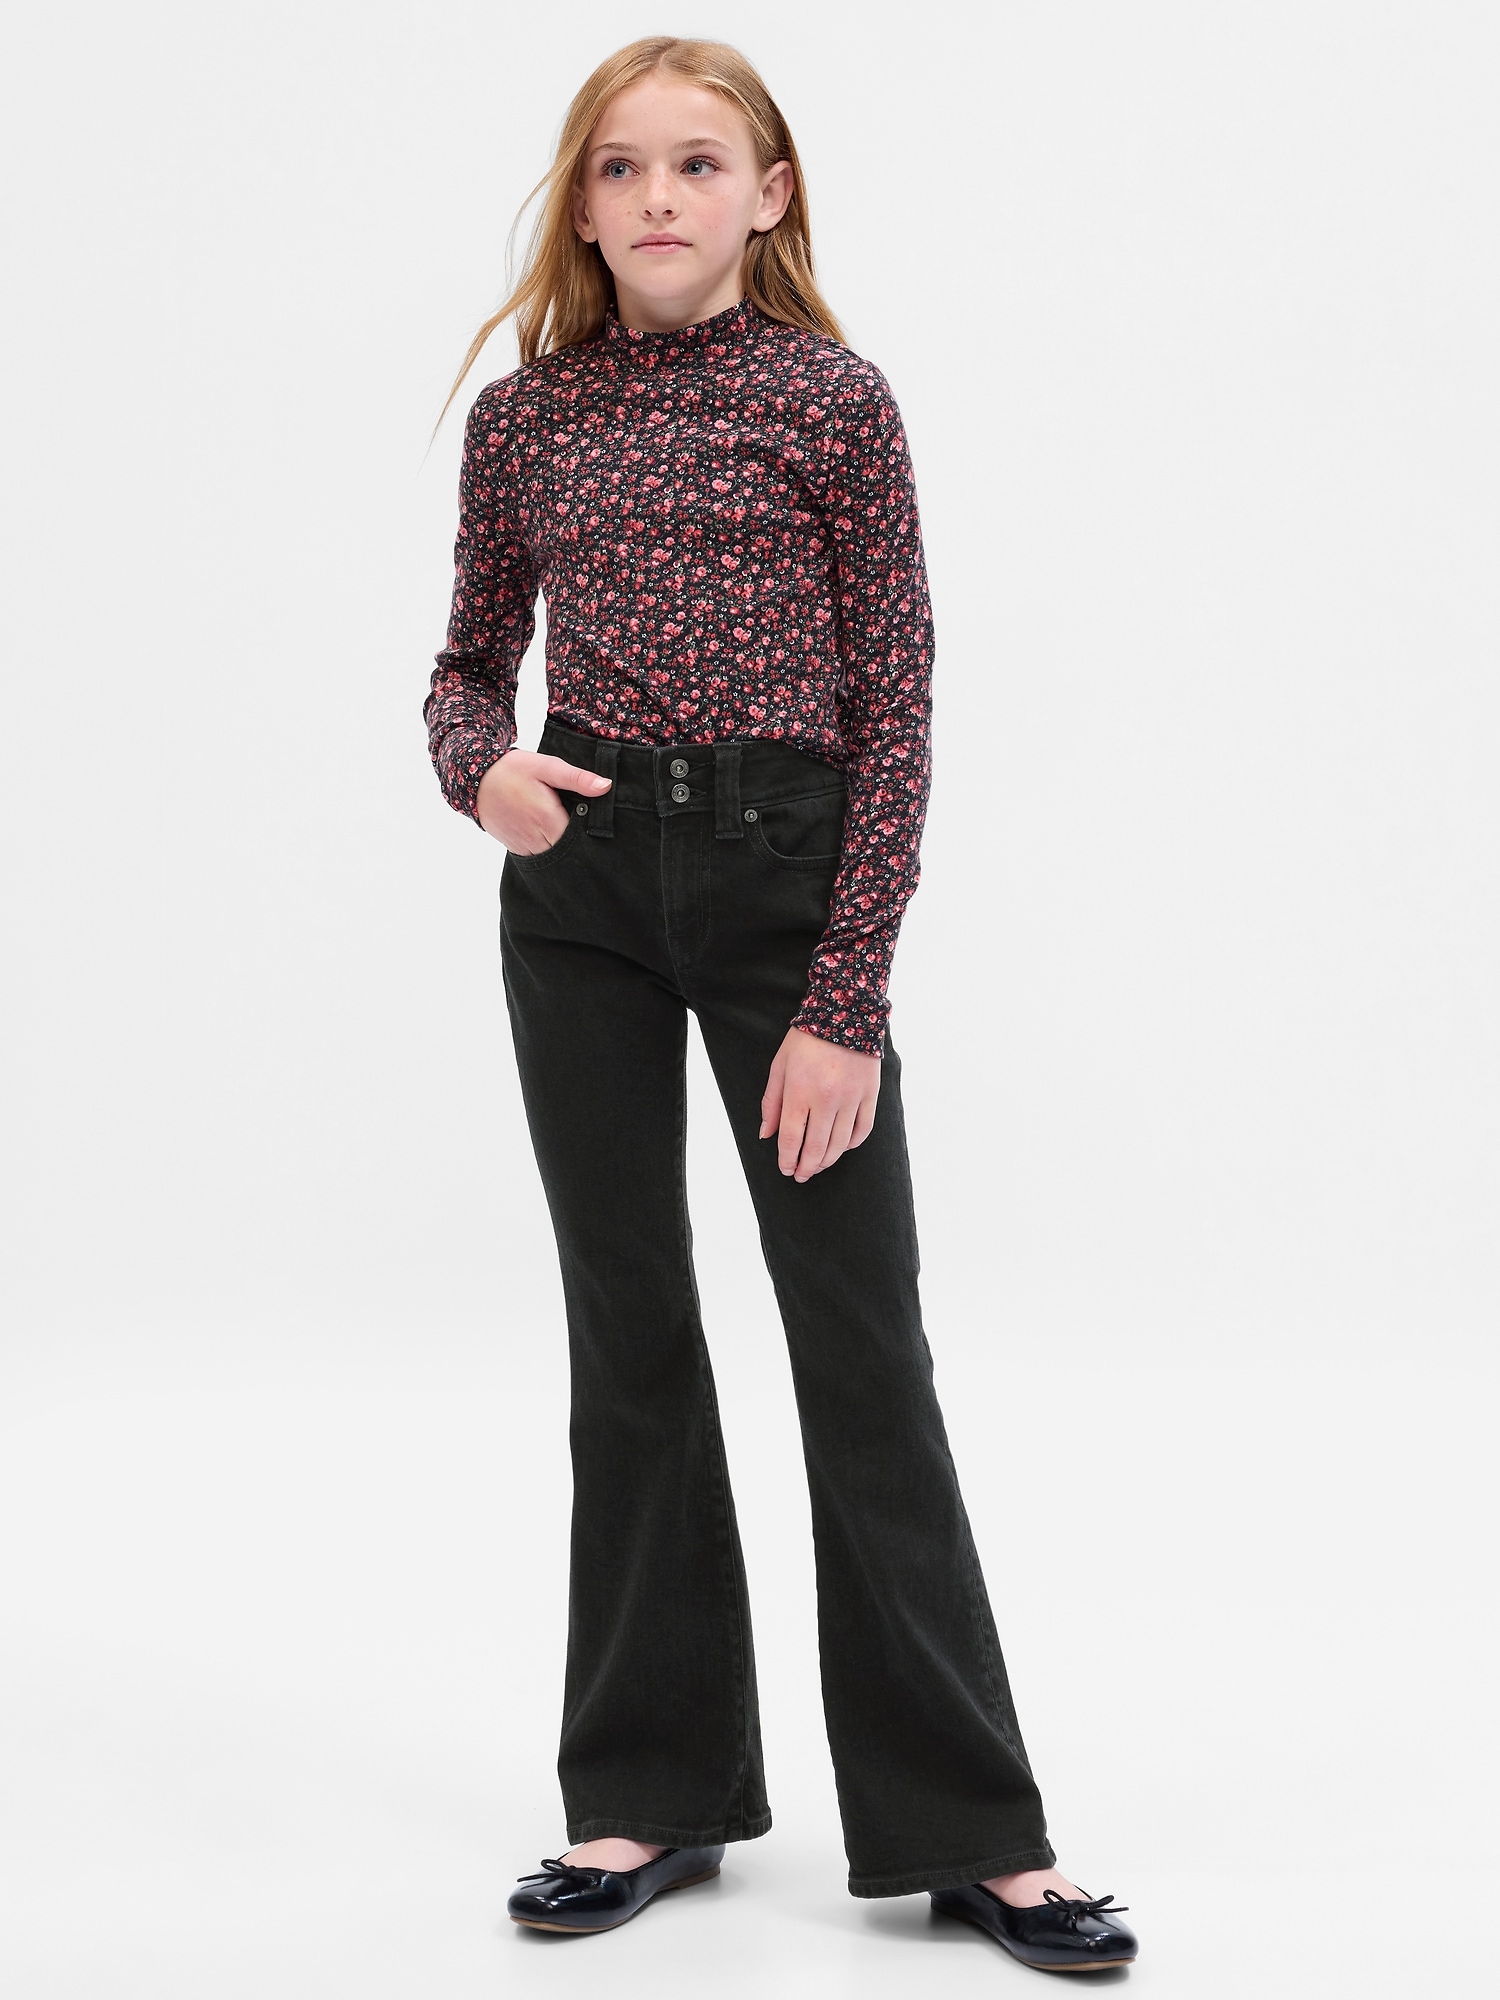 Bell Bottoms & Flare Jeans to Add to Your Kid's Closet